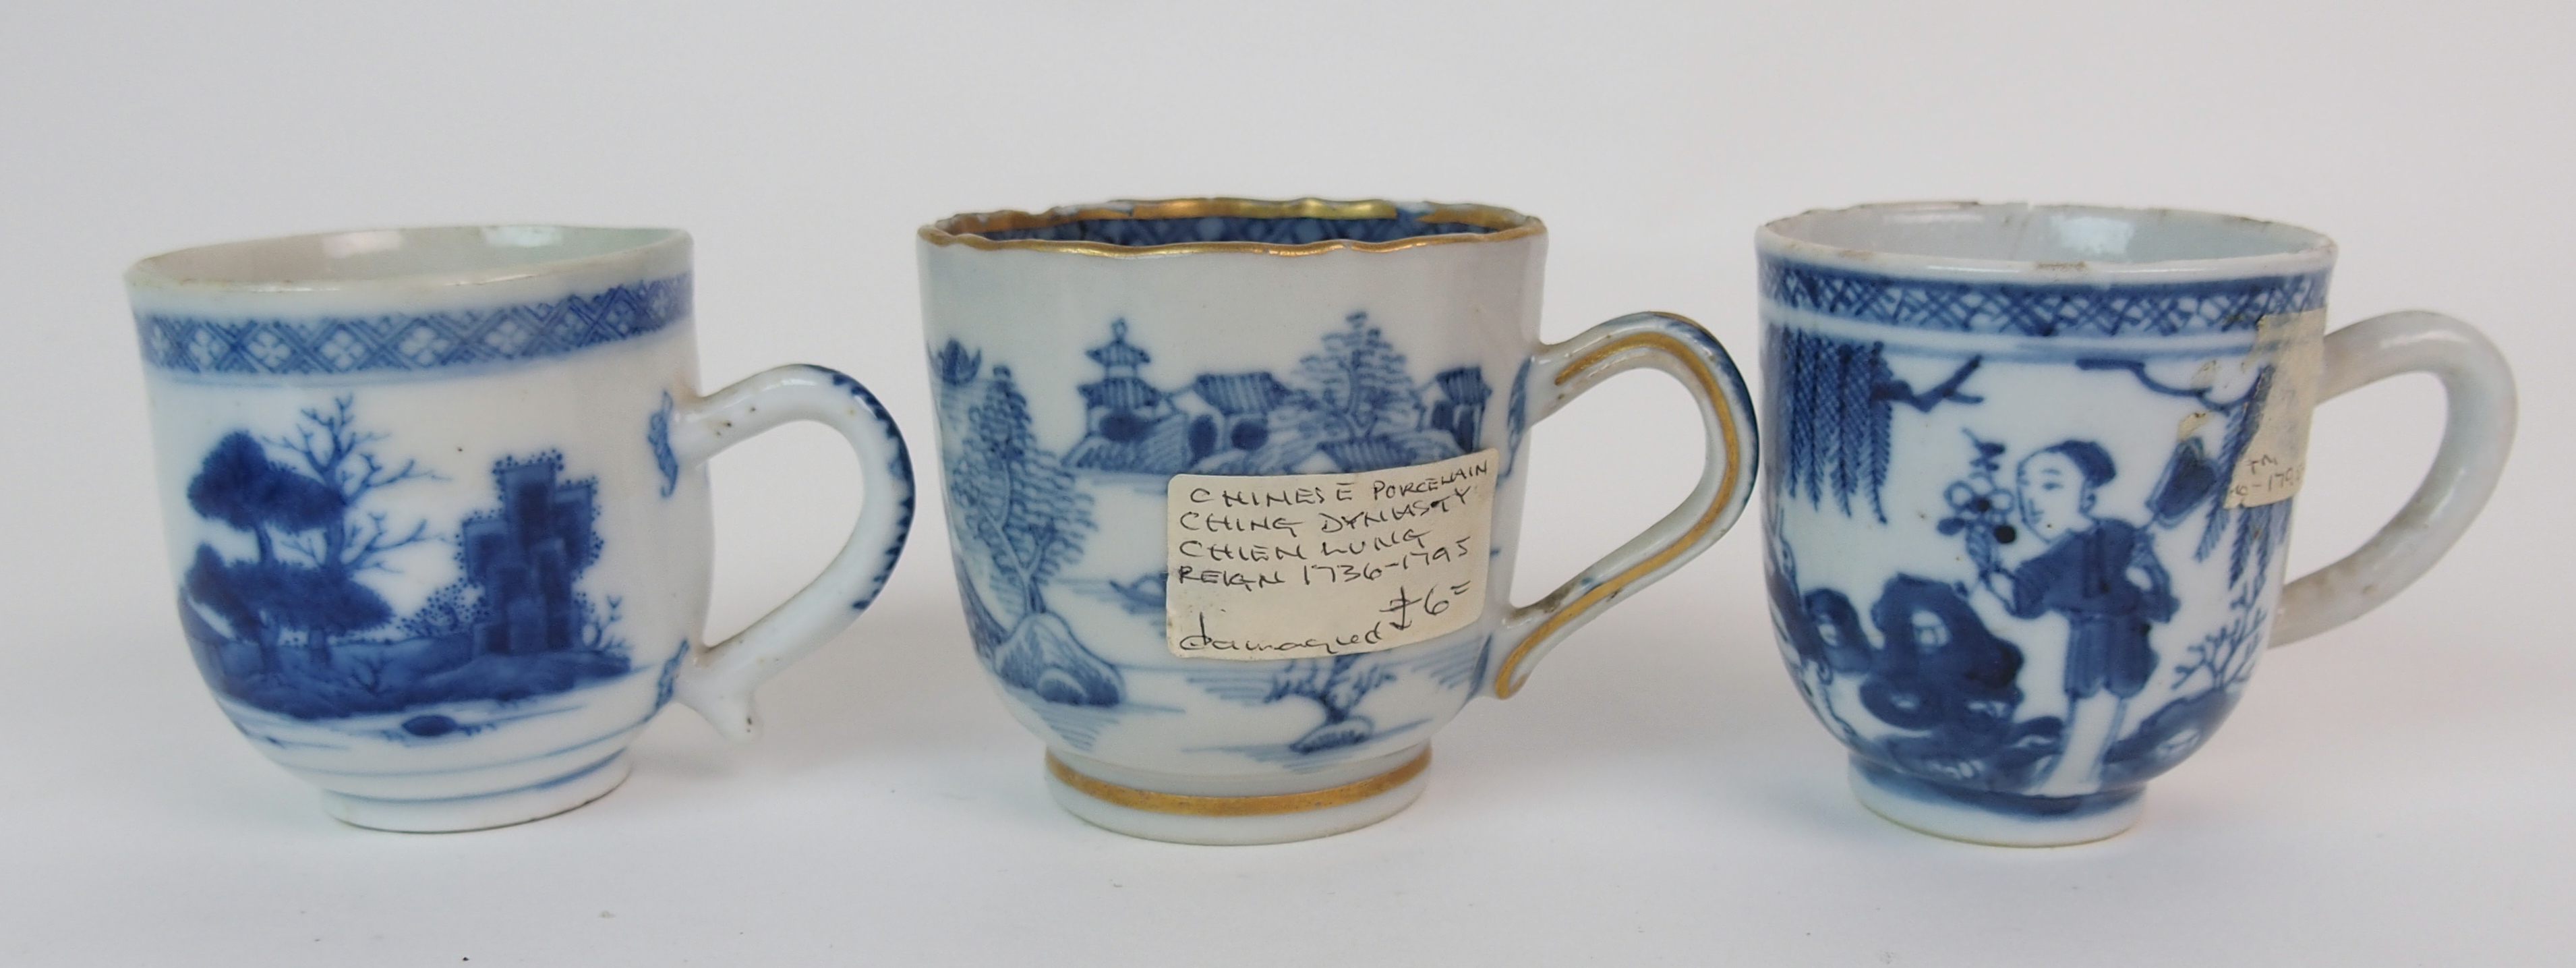 A group of twenty-three Chinese export teacups painted with typical landscapes and gilt rims, - Image 5 of 10